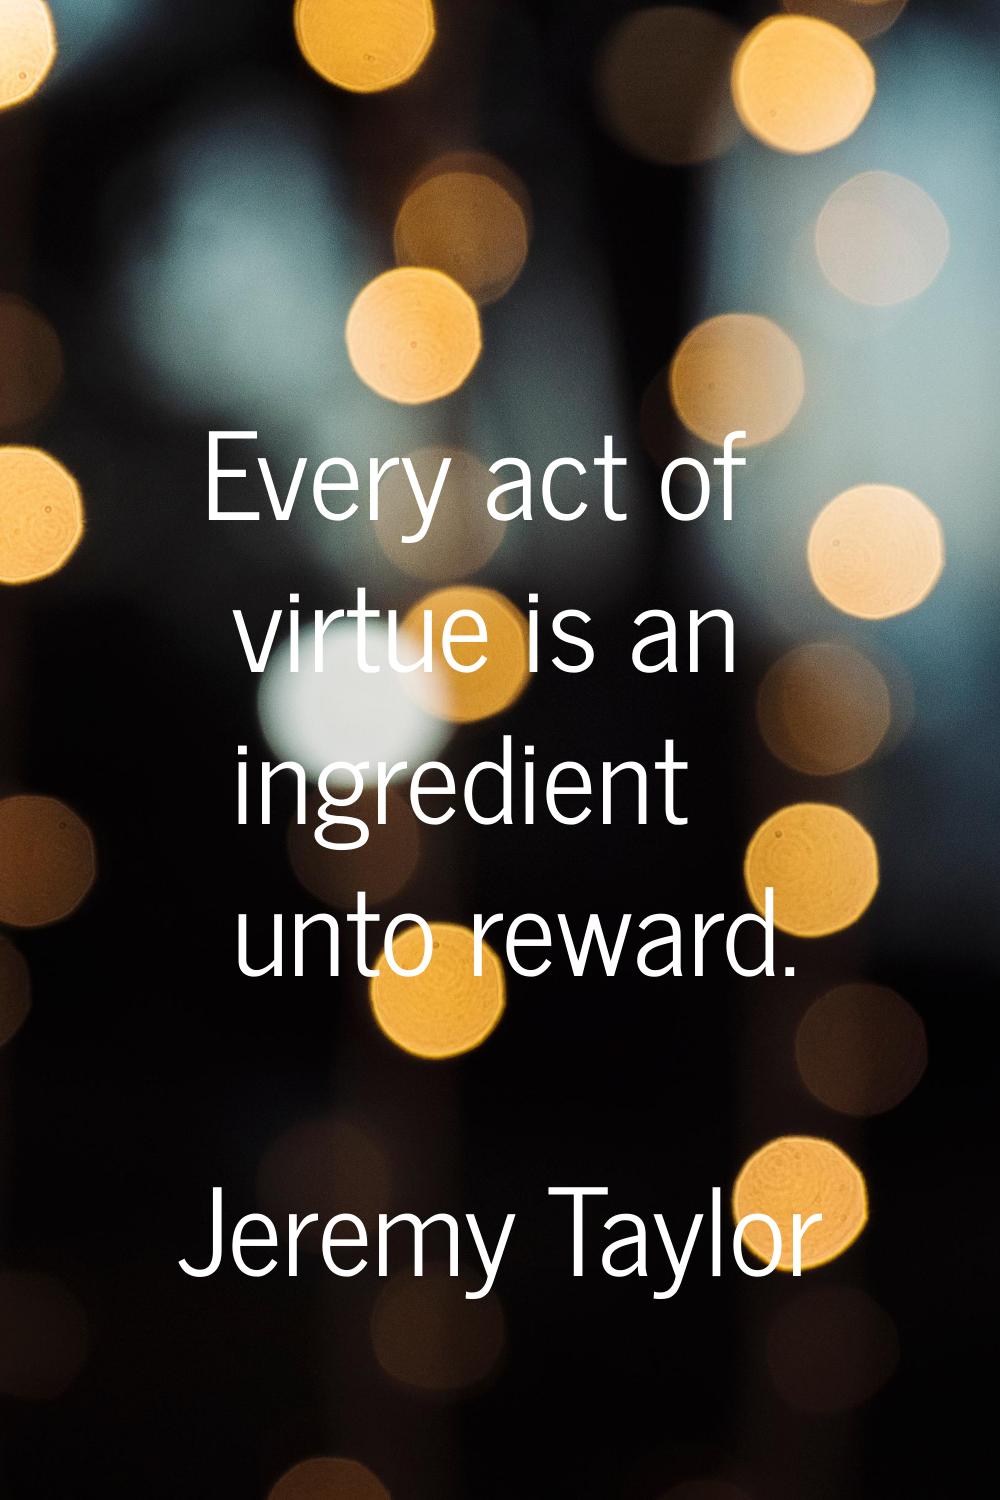 Every act of virtue is an ingredient unto reward.